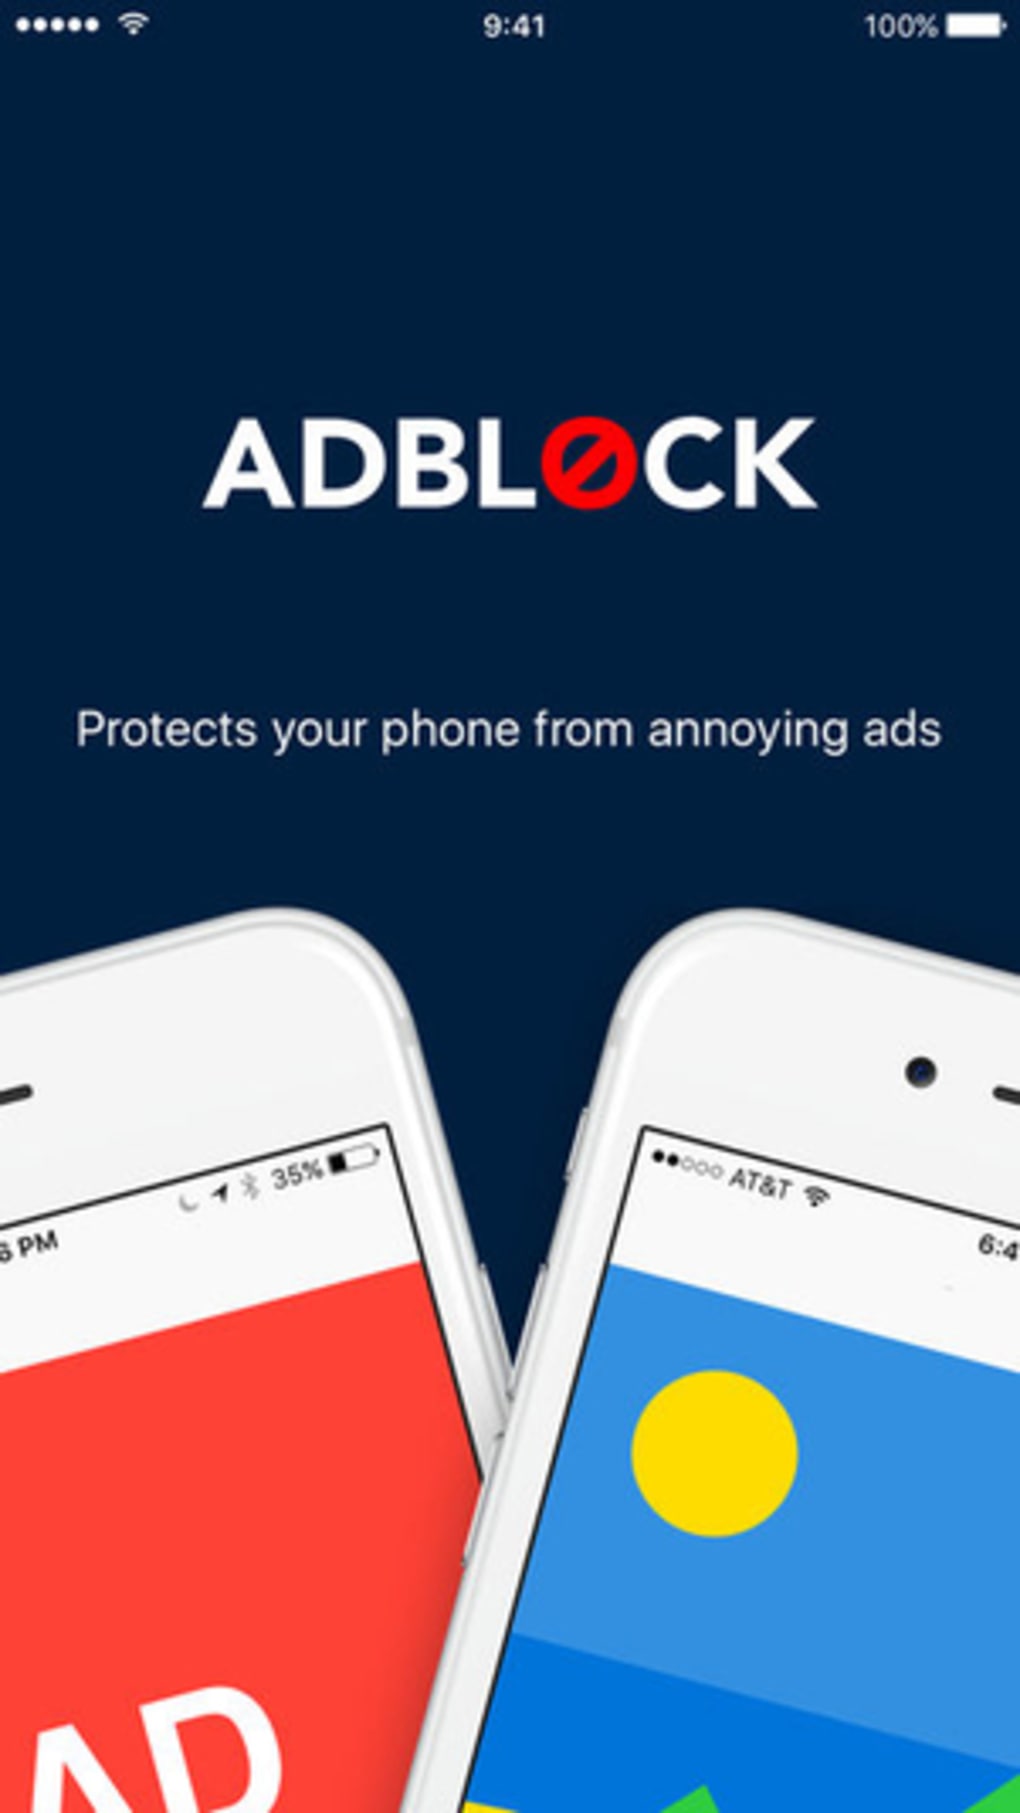 How to Use an Ad Blocker for iPhone: A Comprehensive Guide